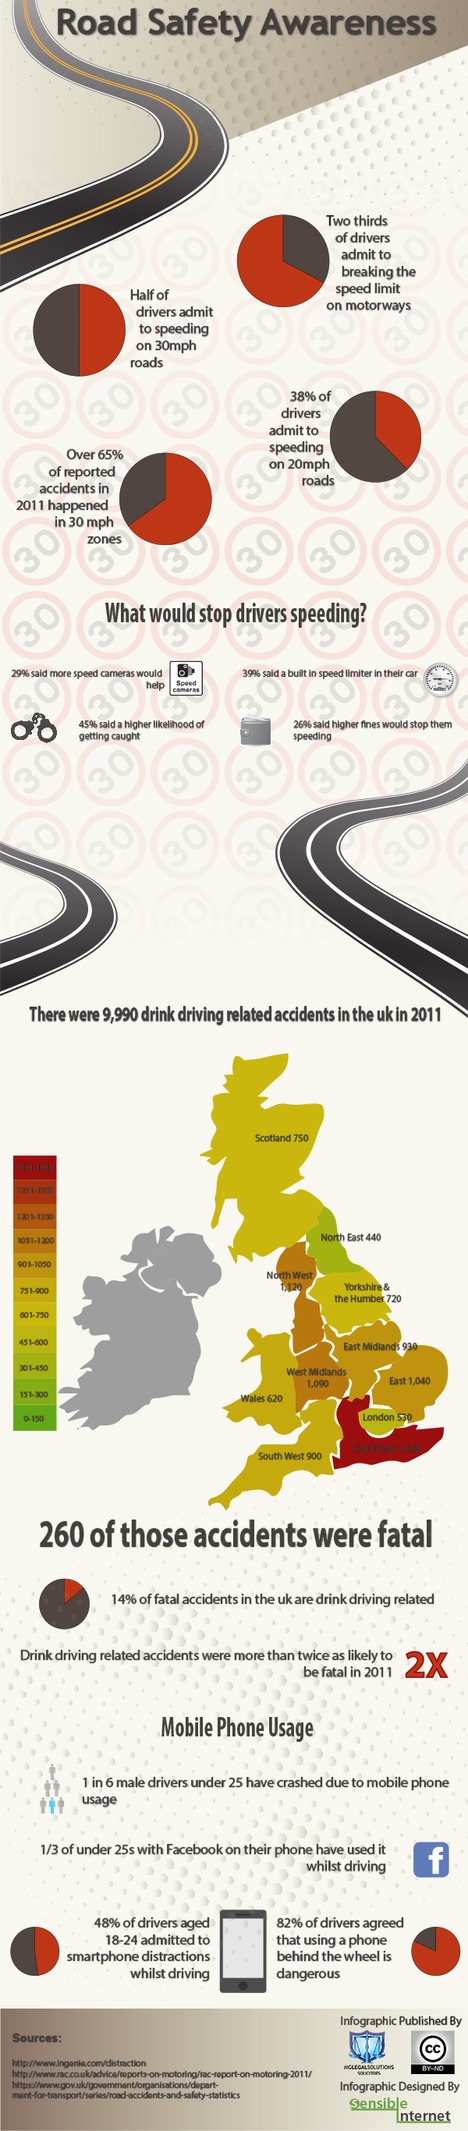 Road Safety Awareness Infographic